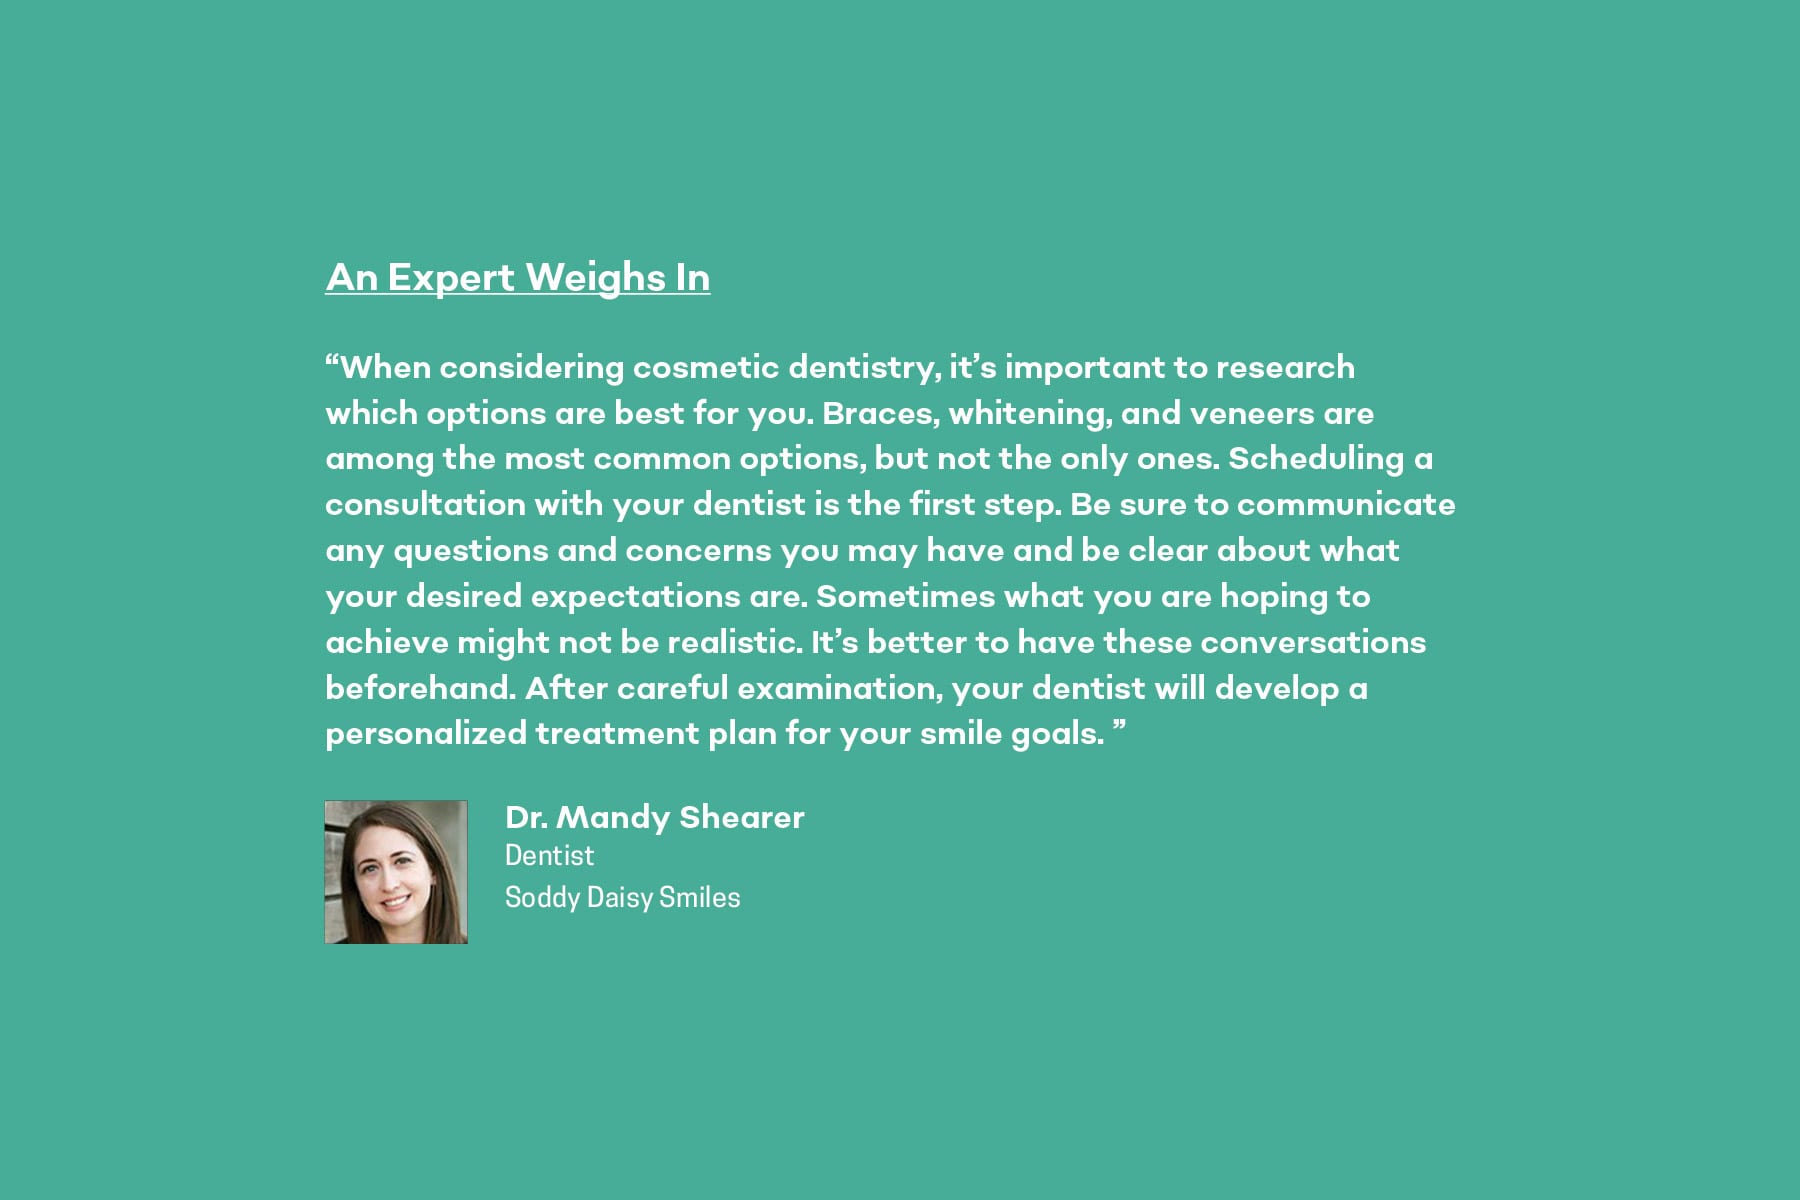 Dr. Mandy Shearer at Soddy Daisy Smiles shares her expert opinion on veneers